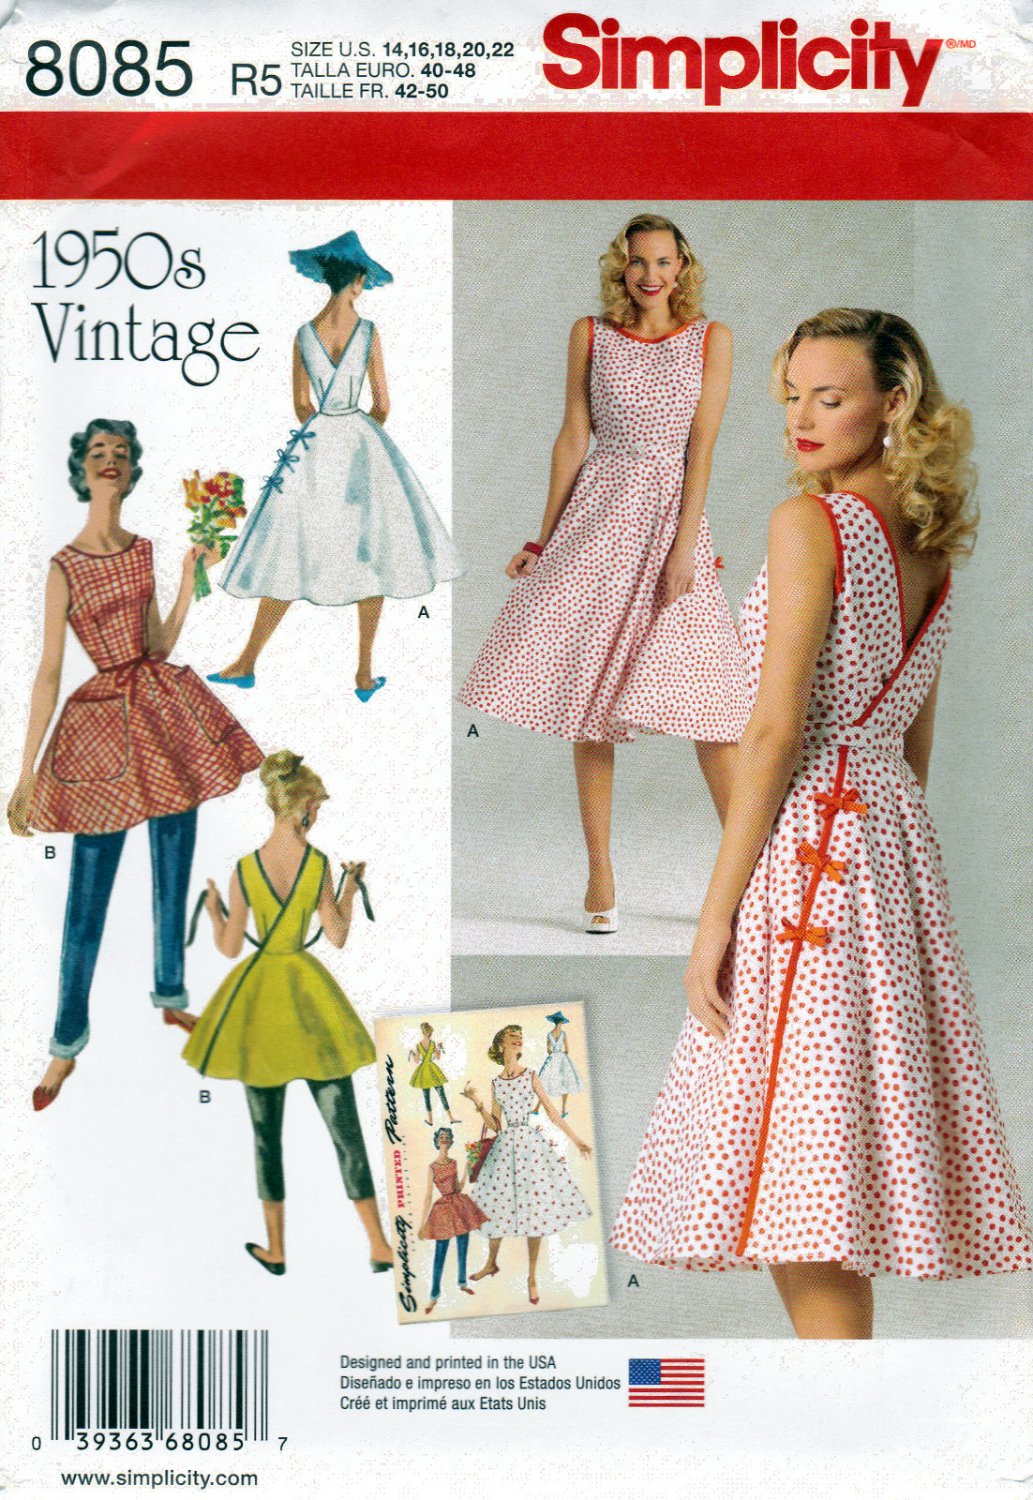 Simplicity 8085 Womens Back Wrap Dress Sewing Pattern 1950 Vintage Style Retro Size 14-16-18-20-22